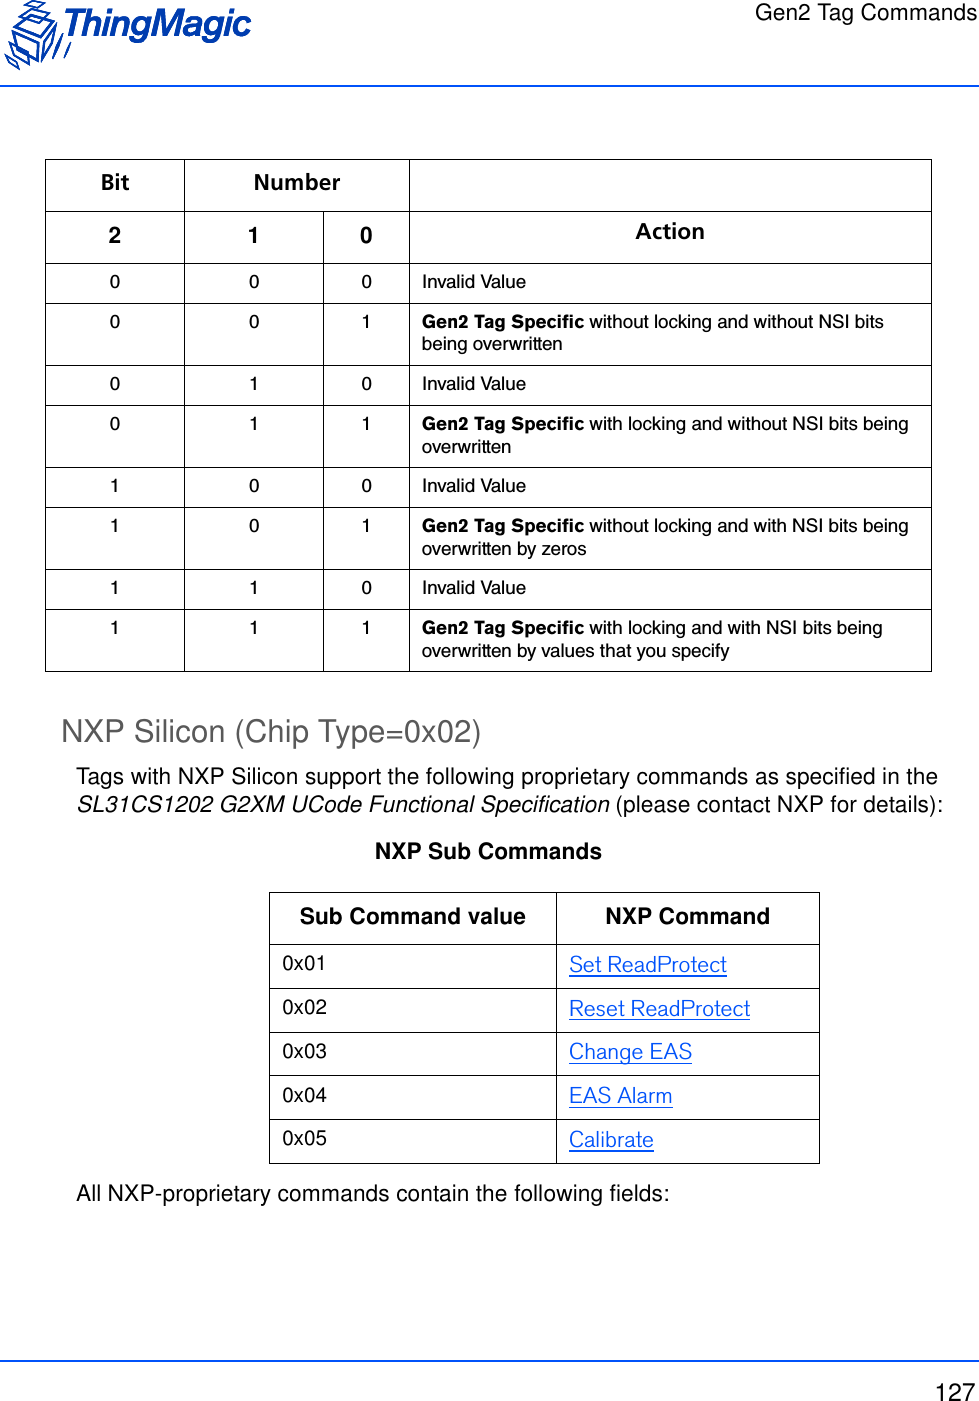 Gen2 Tag Commands127NXP Silicon (Chip Type=0x02)Tags with NXP Silicon support the following proprietary commands as specified in the SL31CS1202 G2XM UCode Functional Specification (please contact NXP for details):NXP Sub CommandsAll NXP-proprietary commands contain the following fields:Bit Number210 Action0 0 0 Invalid Value001Gen2 Tag Specific without locking and without NSI bits being overwritten0 1 0 Invalid Value011Gen2 Tag Specific with locking and without NSI bits being overwritten1 0 0 Invalid Value101Gen2 Tag Specific without locking and with NSI bits being overwritten by zeros1 1 0 Invalid Value111Gen2 Tag Specific with locking and with NSI bits being overwritten by values that you specifySub Command value NXP Command0x01 Set ReadProtect0x02 Reset ReadProtect0x03 Change EAS0x04 EAS Alarm0x05 Calibrate